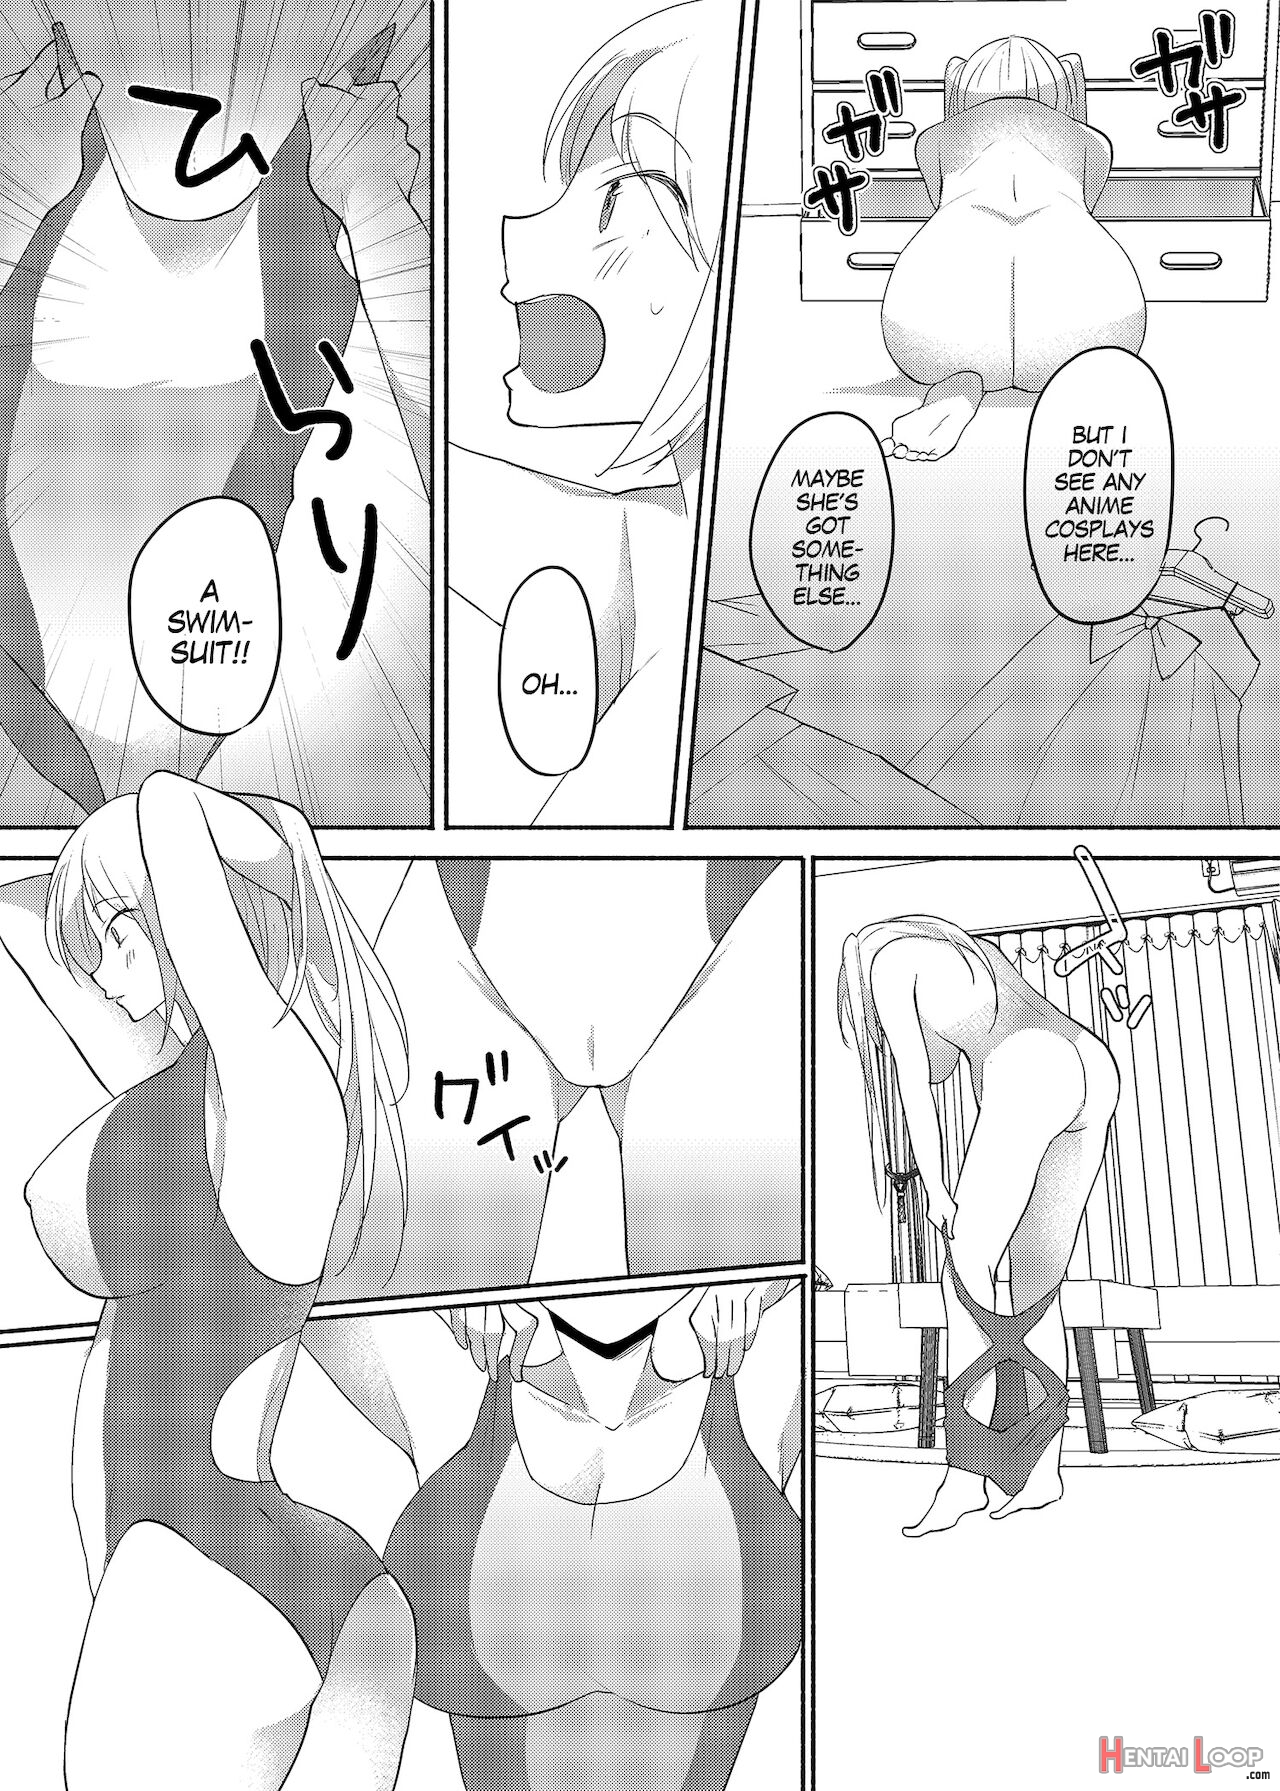 Crossdressing Fetish Gone Out Of Hand page 19